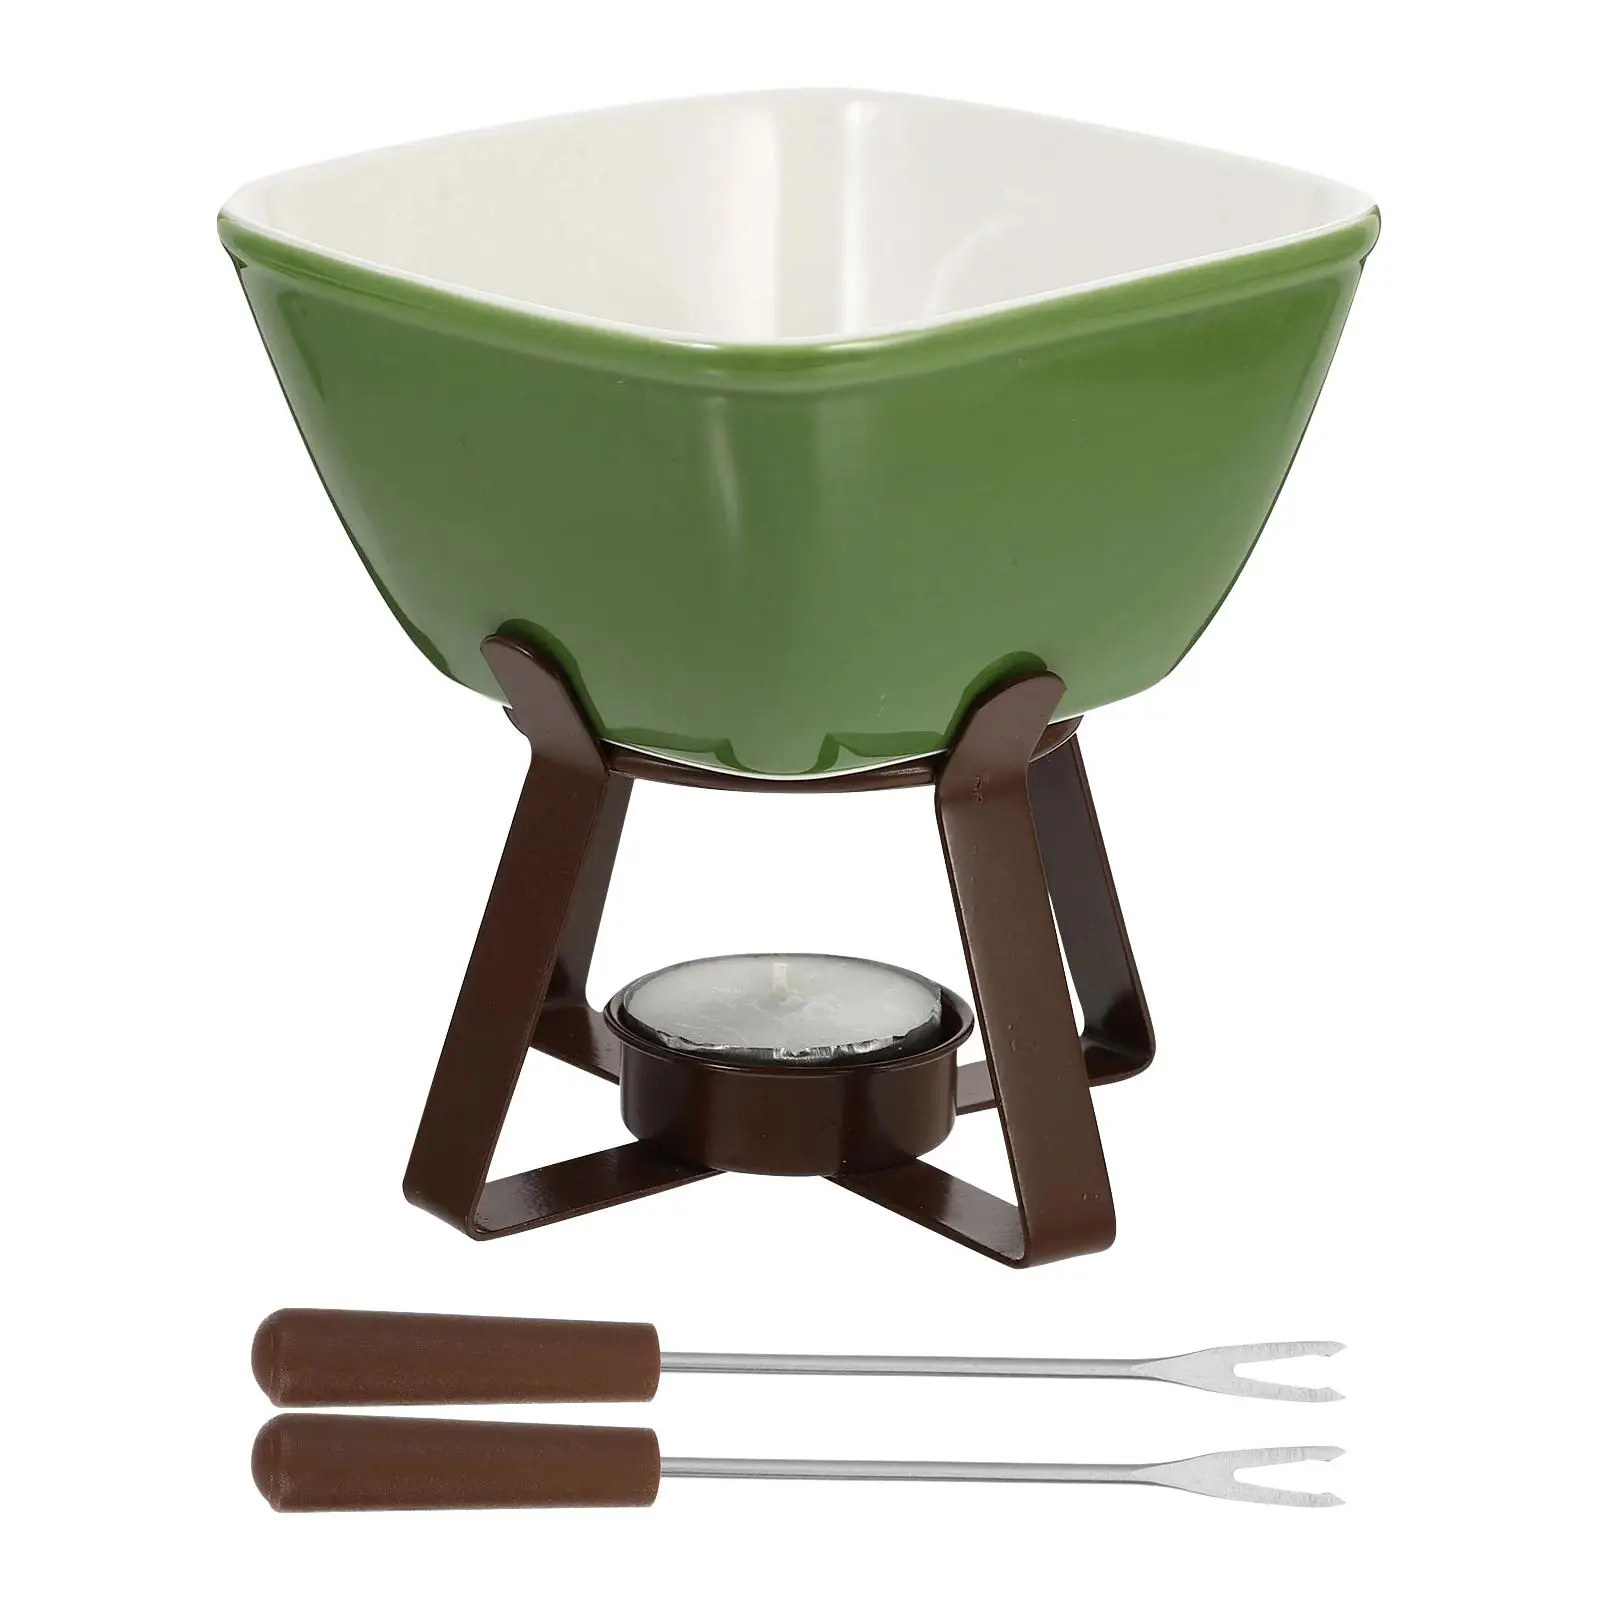 Fondue Mugs with Forks Chocolate Melt Warmer Personal Chocolate Melting Cups Butter Warmer Pot for Home Outdoor Camping Kitchen